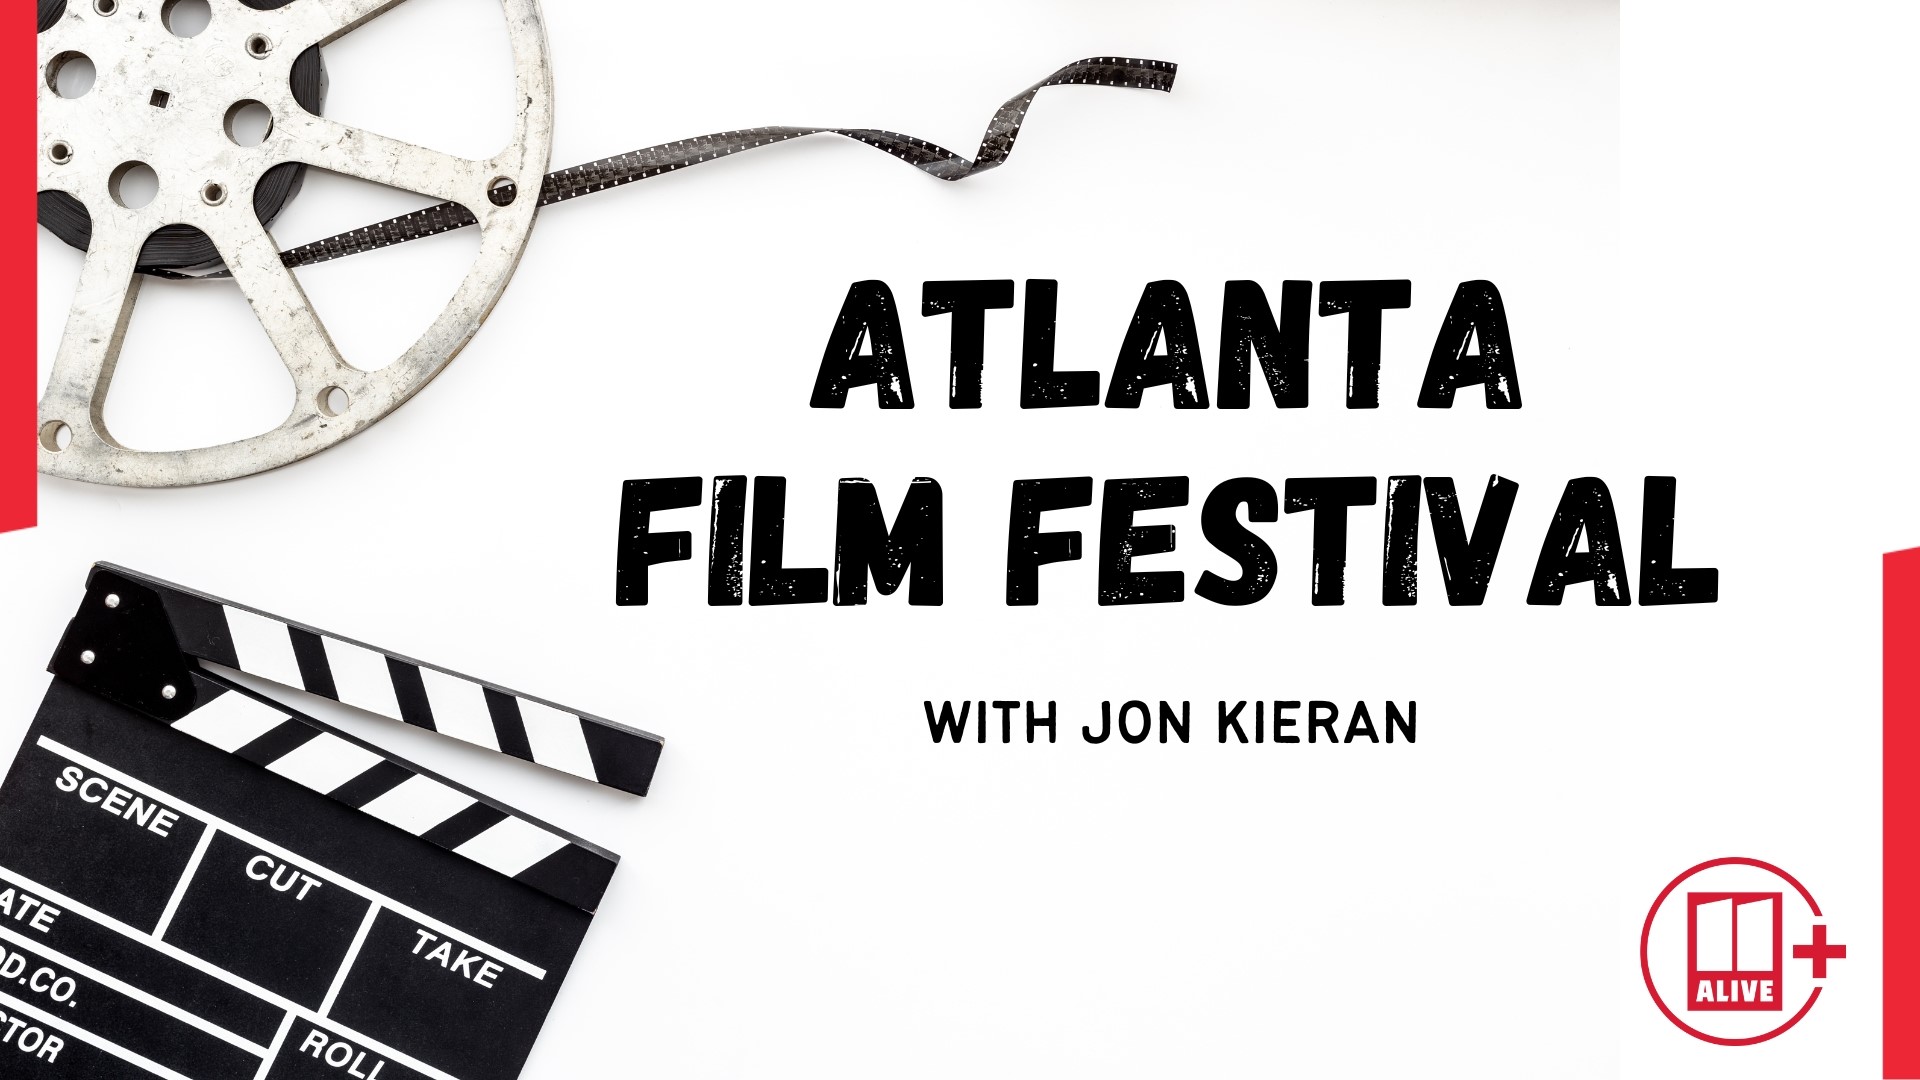 Atlanta Film Festival programmer Jon Kieran peels back the curtain for an inside look at what it takes to mount a major festival in the age of streaming.